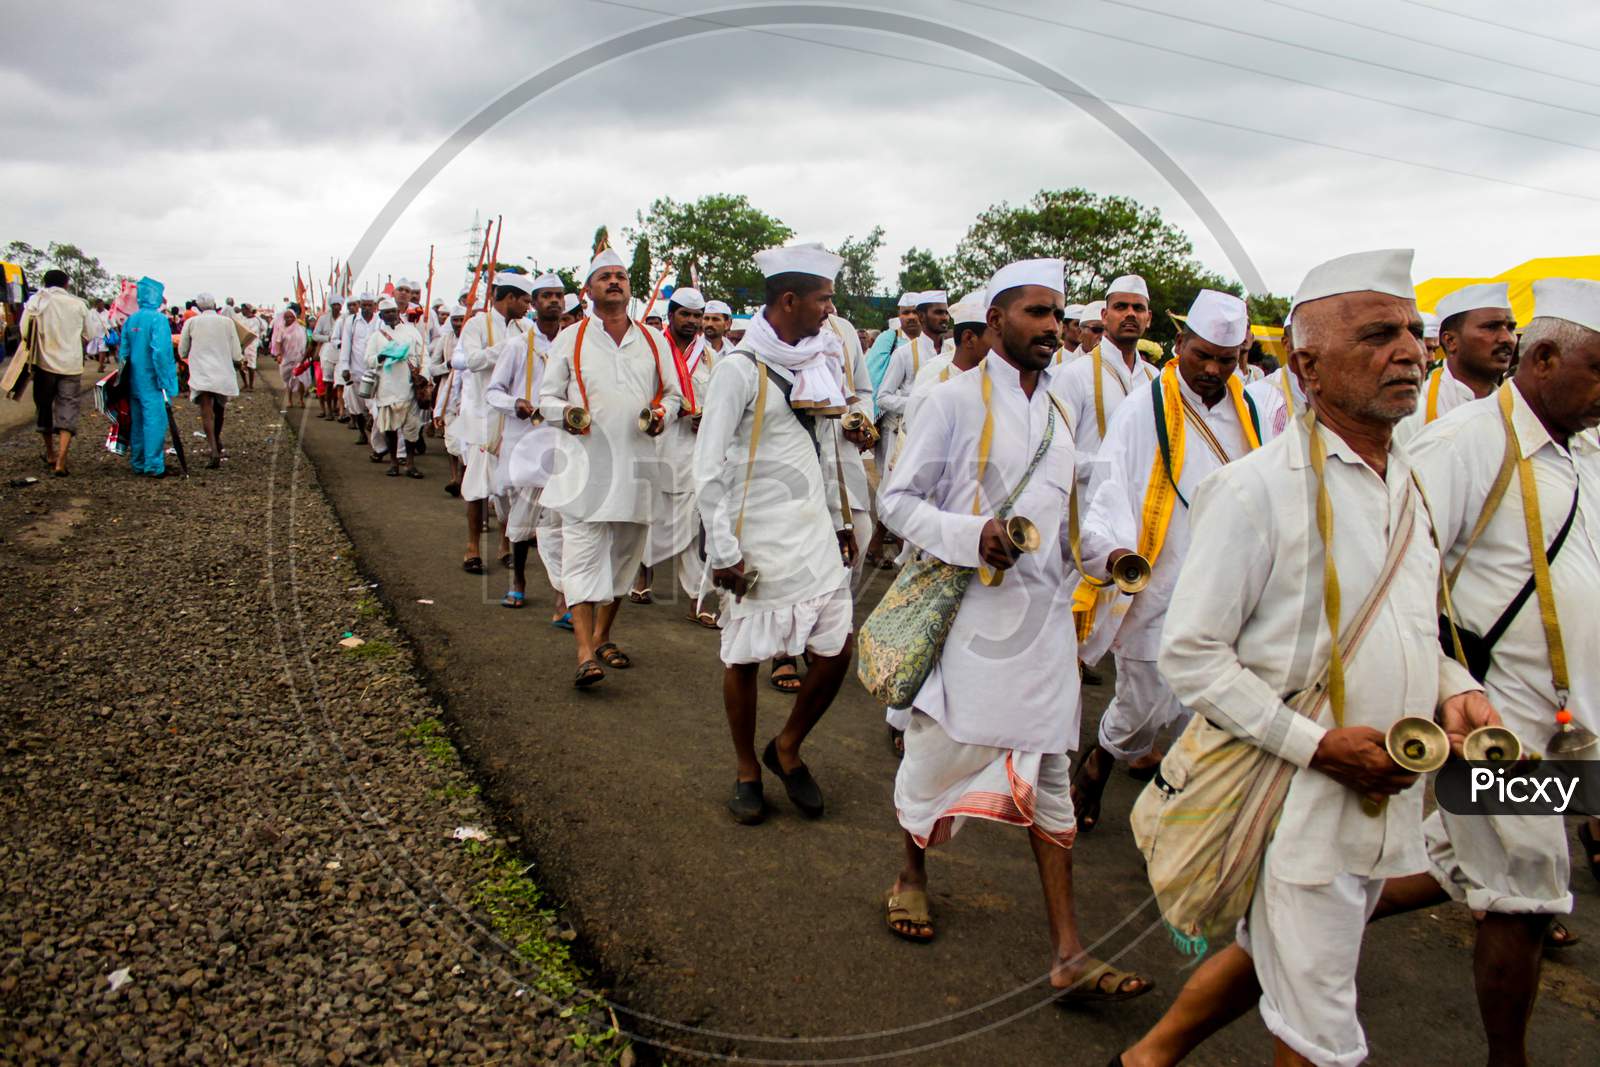 Maharashtrian People Walking The Pilgrimage And Dancing And Singing Devotional Songs